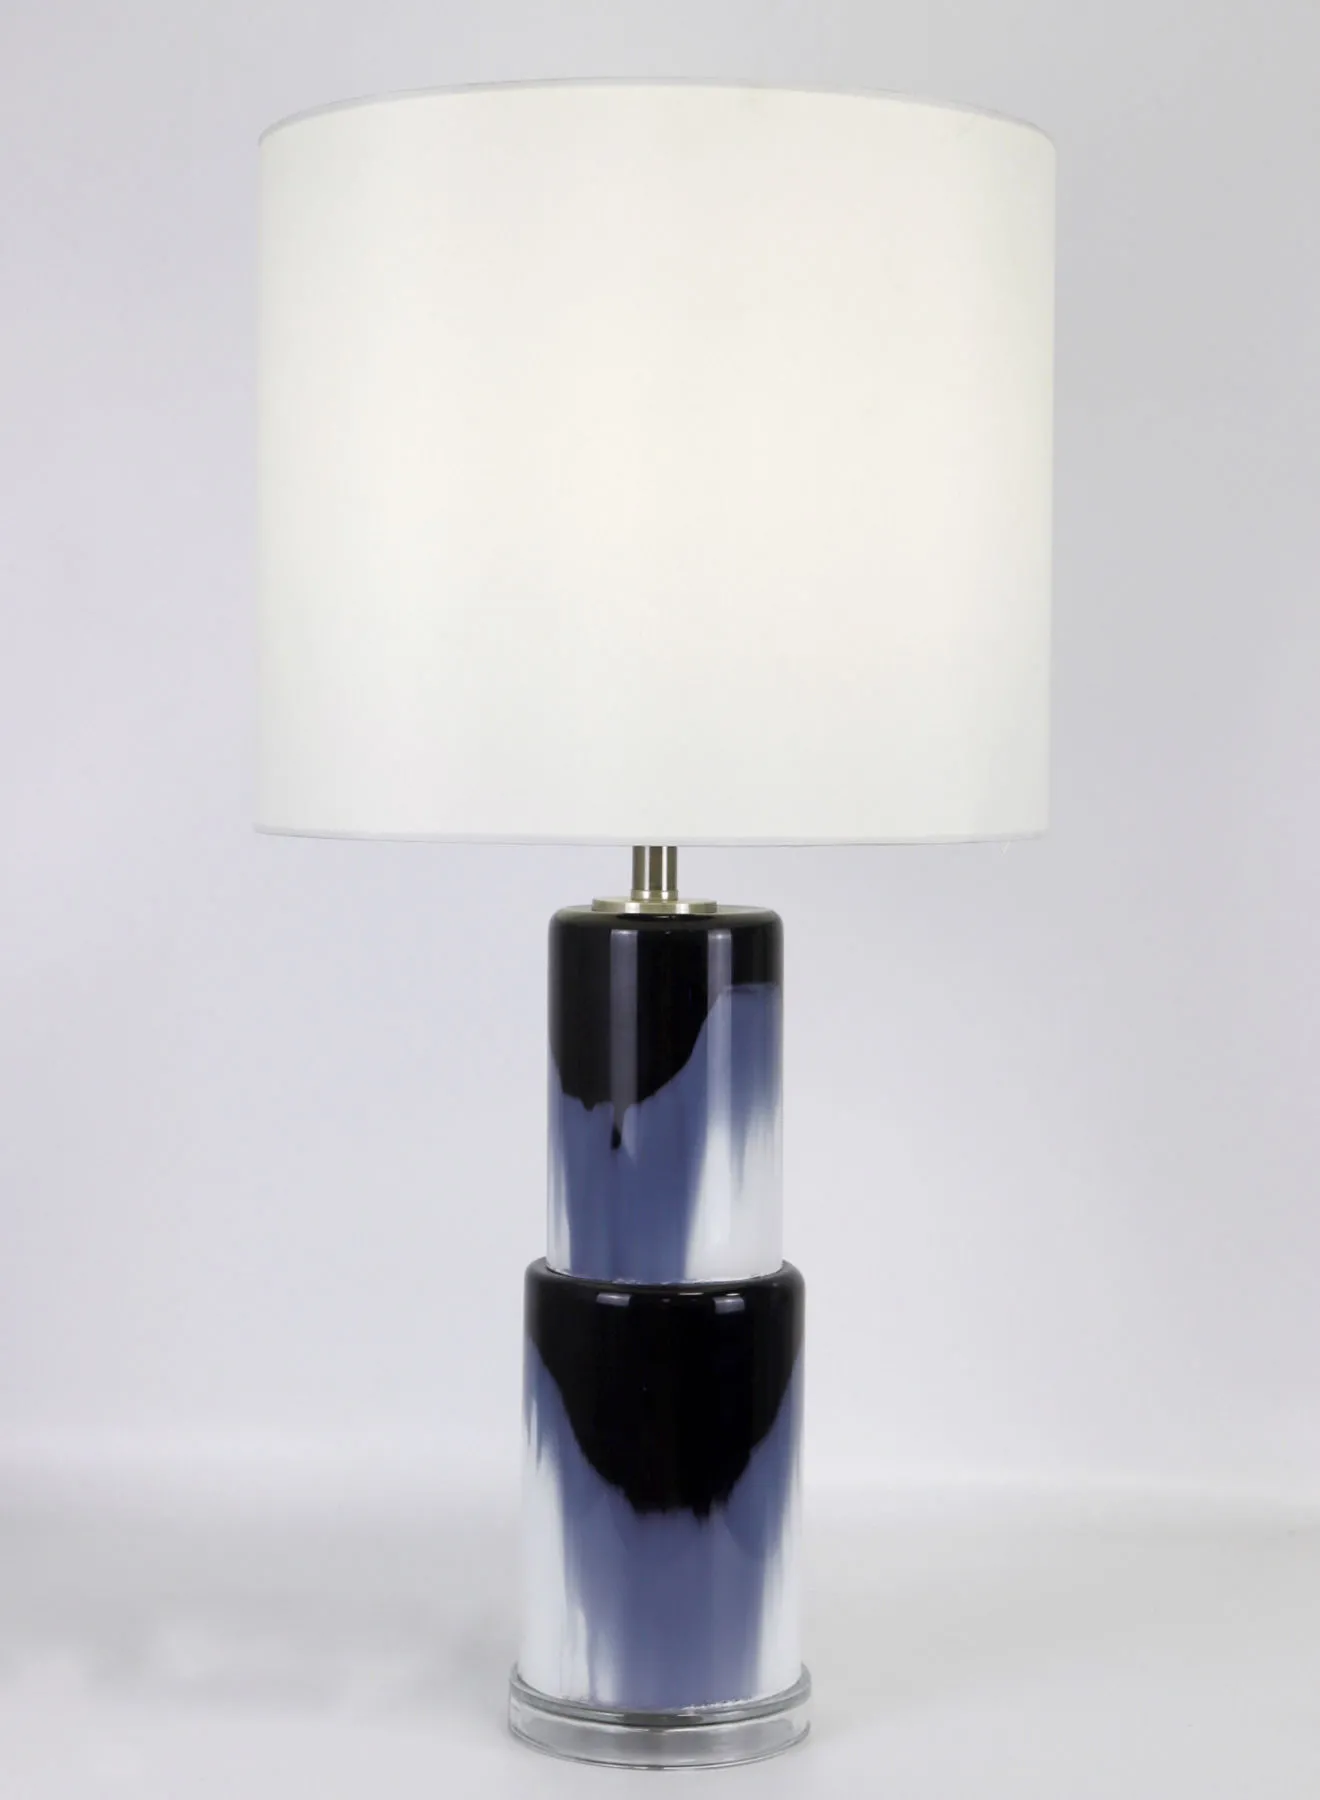 ebb & flow Modern Design Glass Table Lamp Unique Luxury Quality Material for the Perfect Stylish Home RSN71033 Blue/White 13 x 26